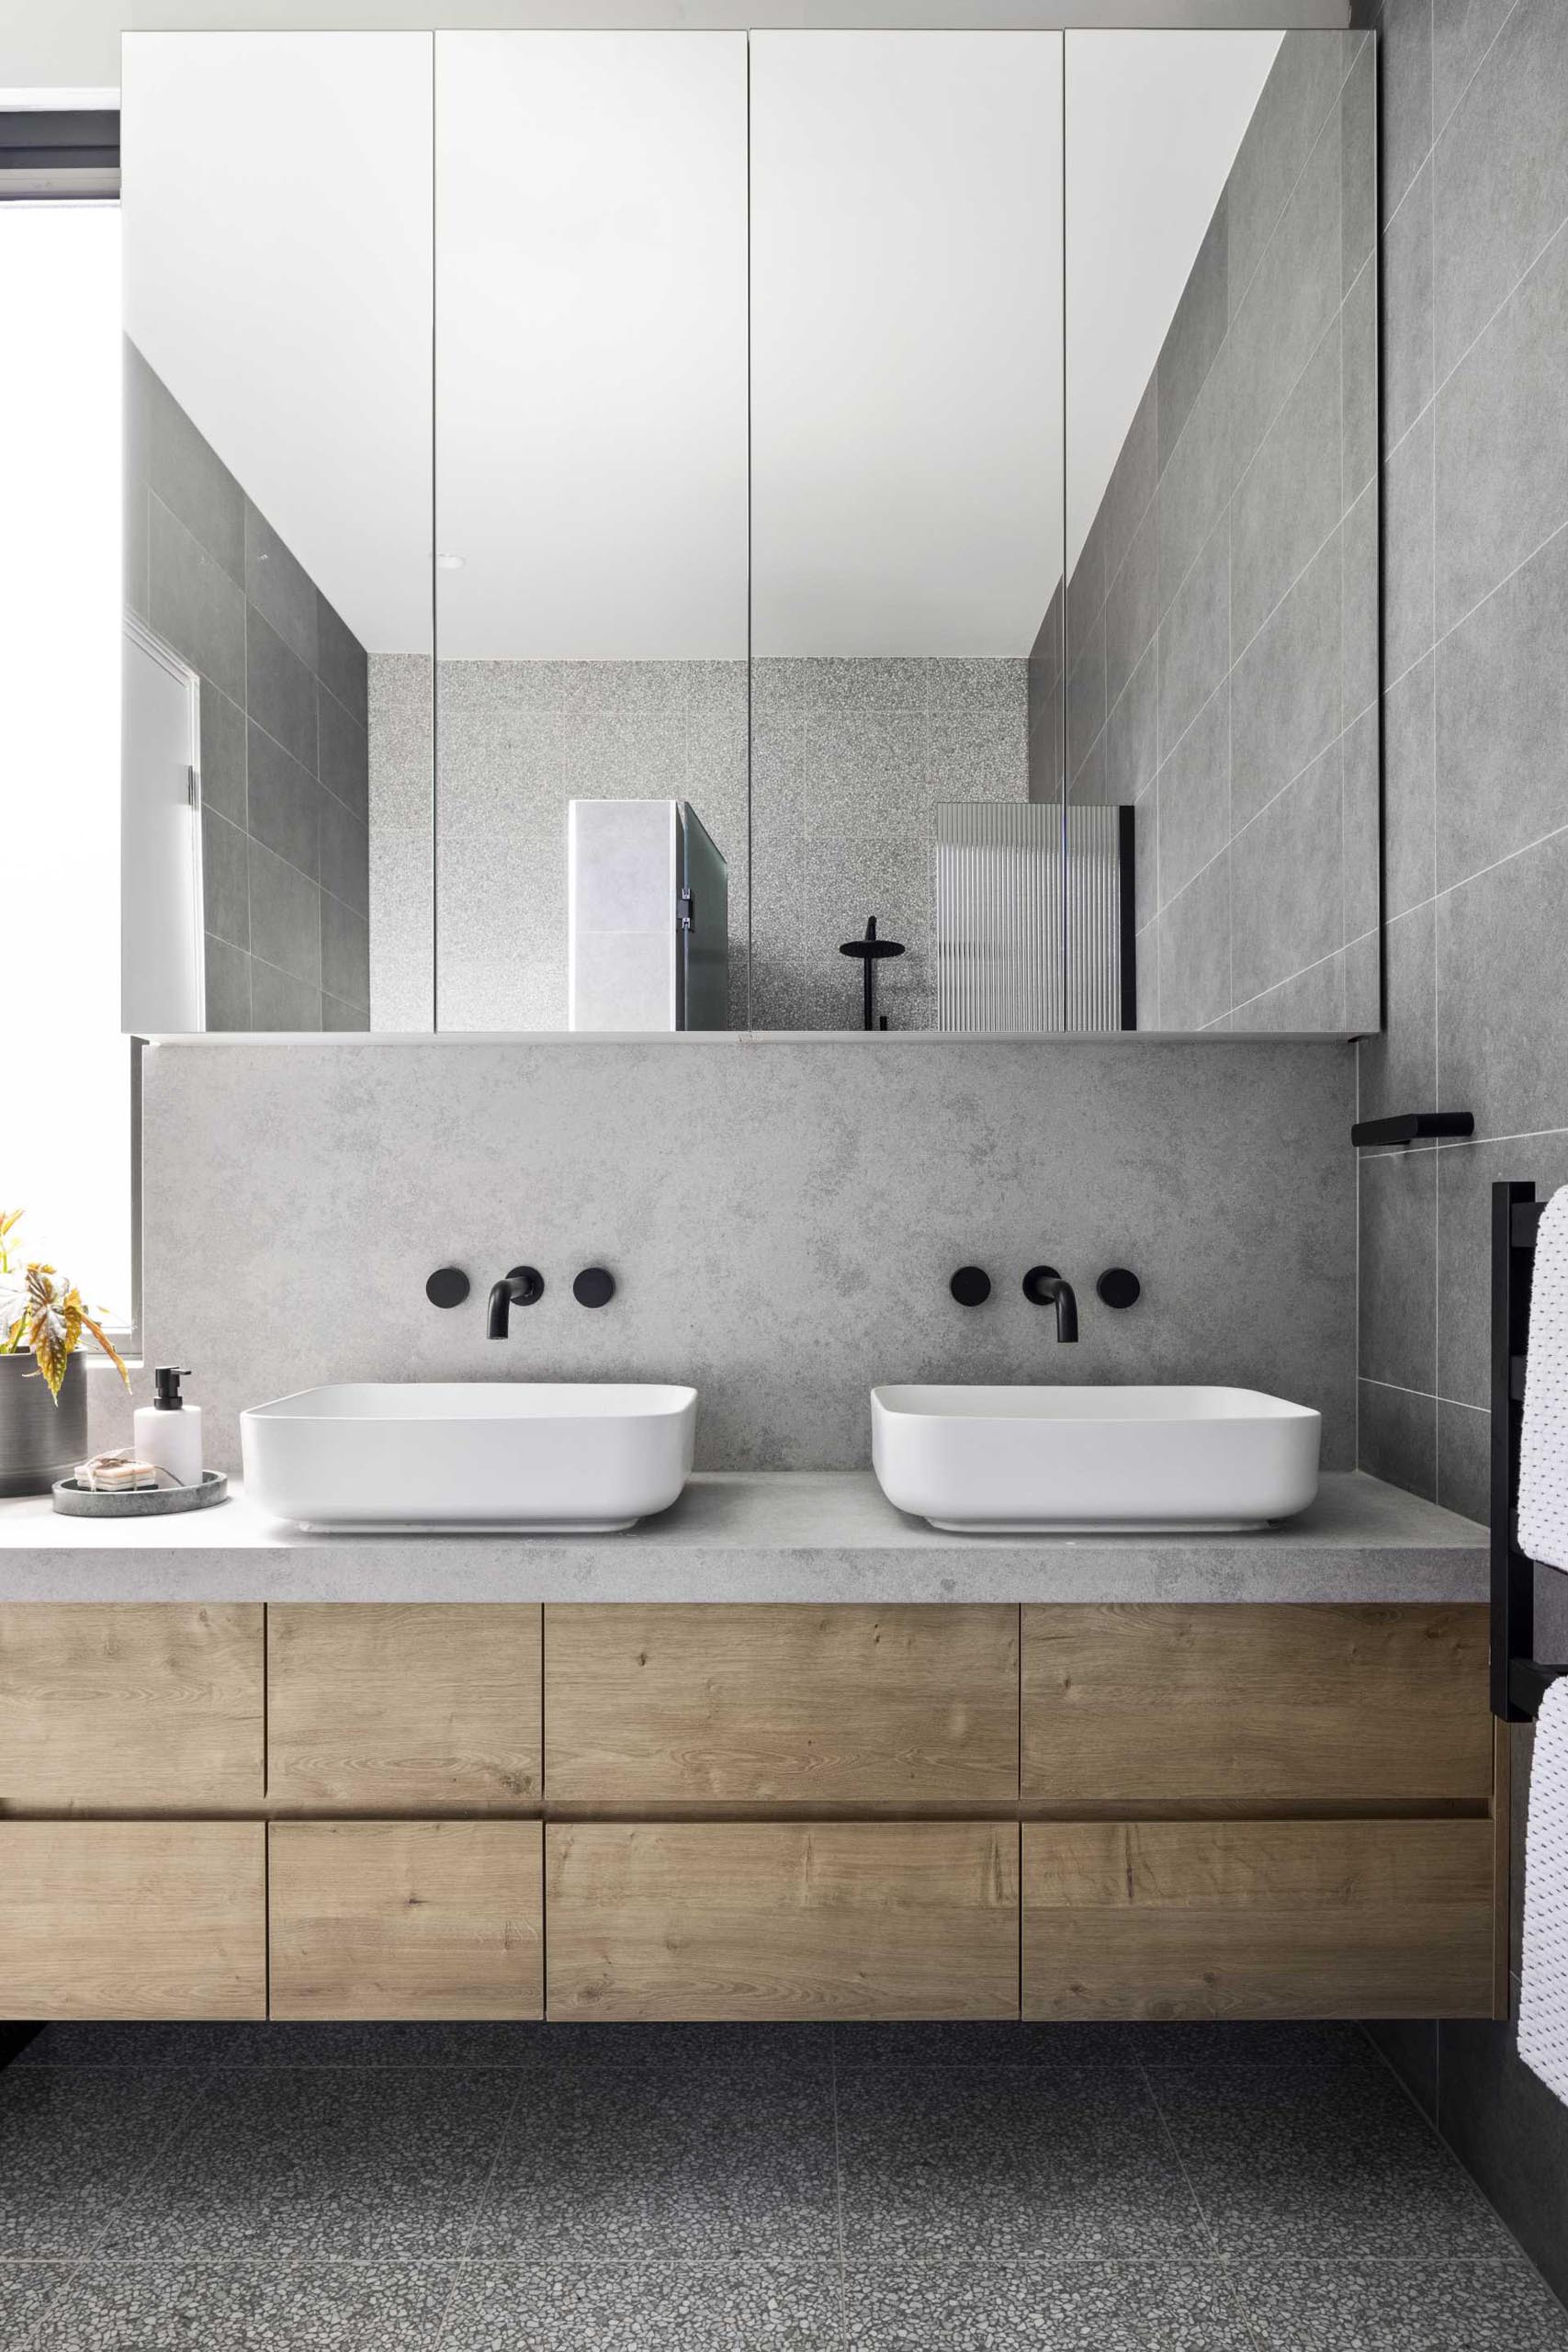 In this modern bathroom, there's Terrazzo tile flooring, a wood vanity, and black tapware and fixtures.